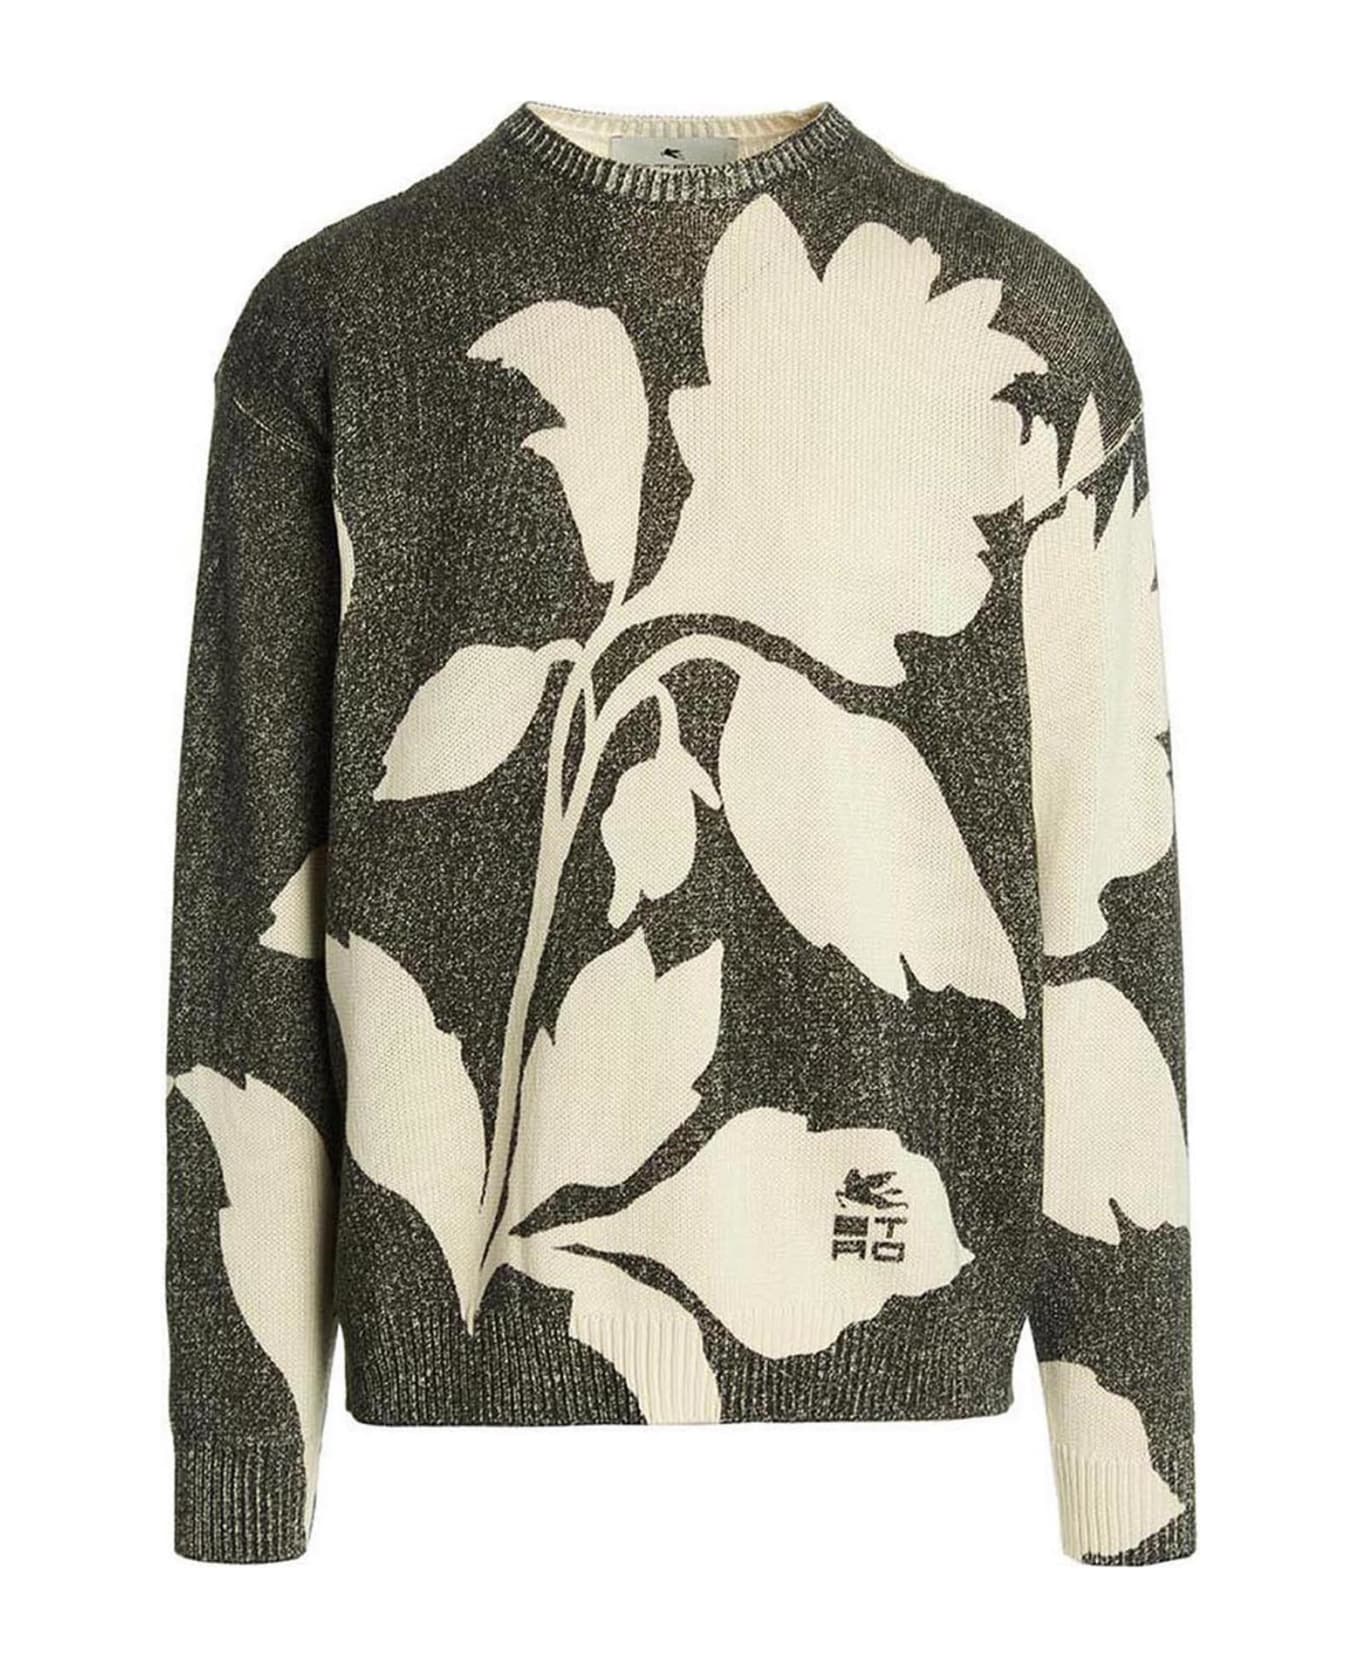 Etro Floral Sweater - Multicolor ニットウェア